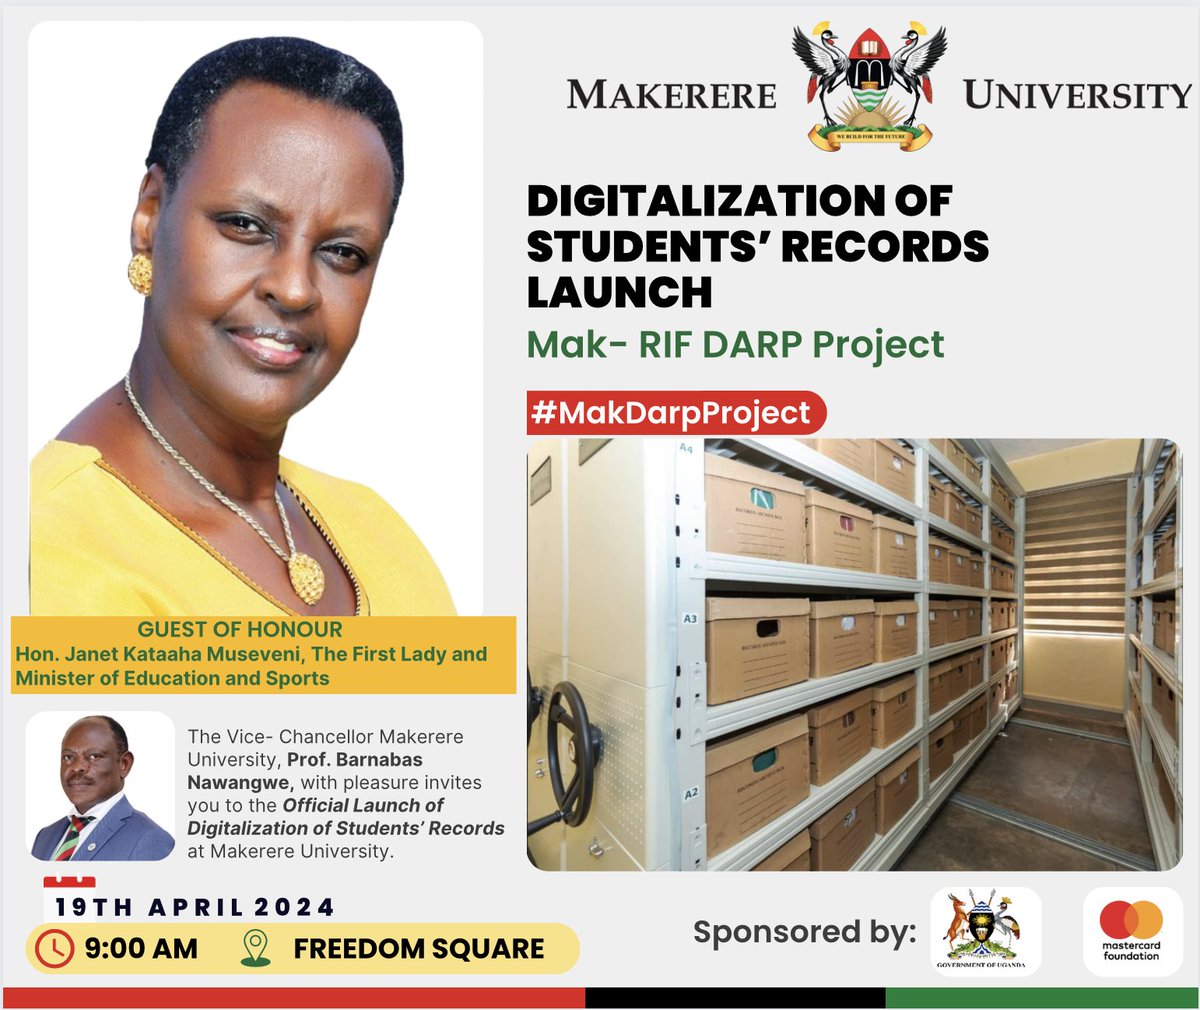 On 19th April, 2024. The Digitalization of Student's Records Launch by Mak-RIF DARP Project will be graced by Guest of Honour Hon. @JanetMuseveni, The First Lady & Minister of @Educ_SportsUg. VC @ProfNawangwe invites you to this Launch @Makerere Freedom Square starting at 9AM.